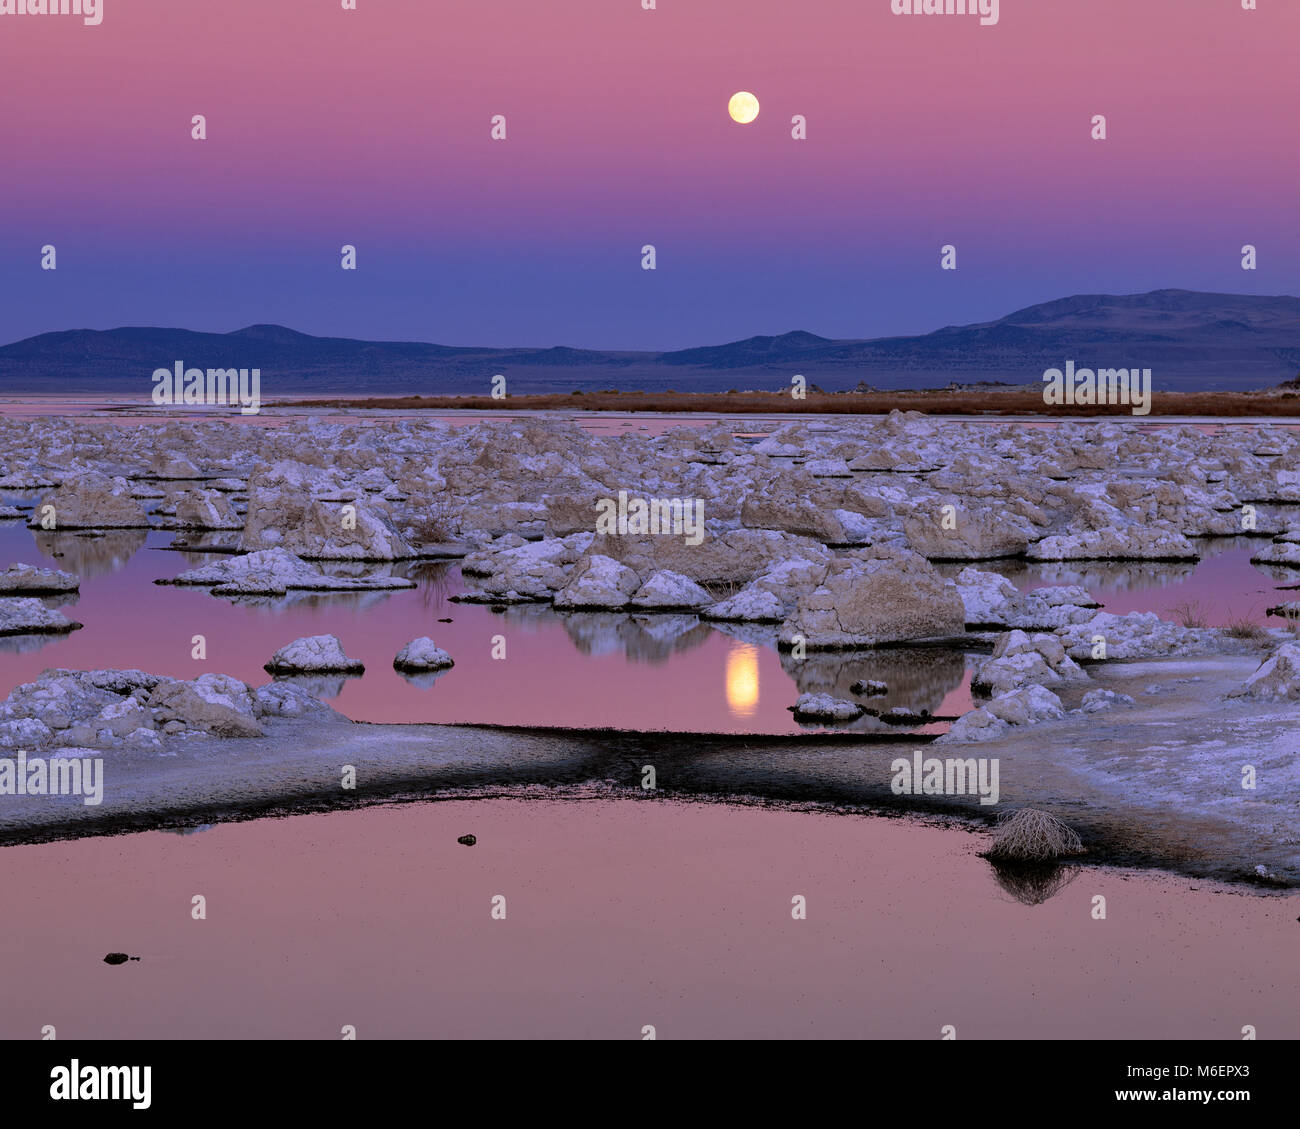 Moonrise, lac Mono, Mono Basin National Forest Scenic Area, Inyo National Forest, Californie Banque D'Images